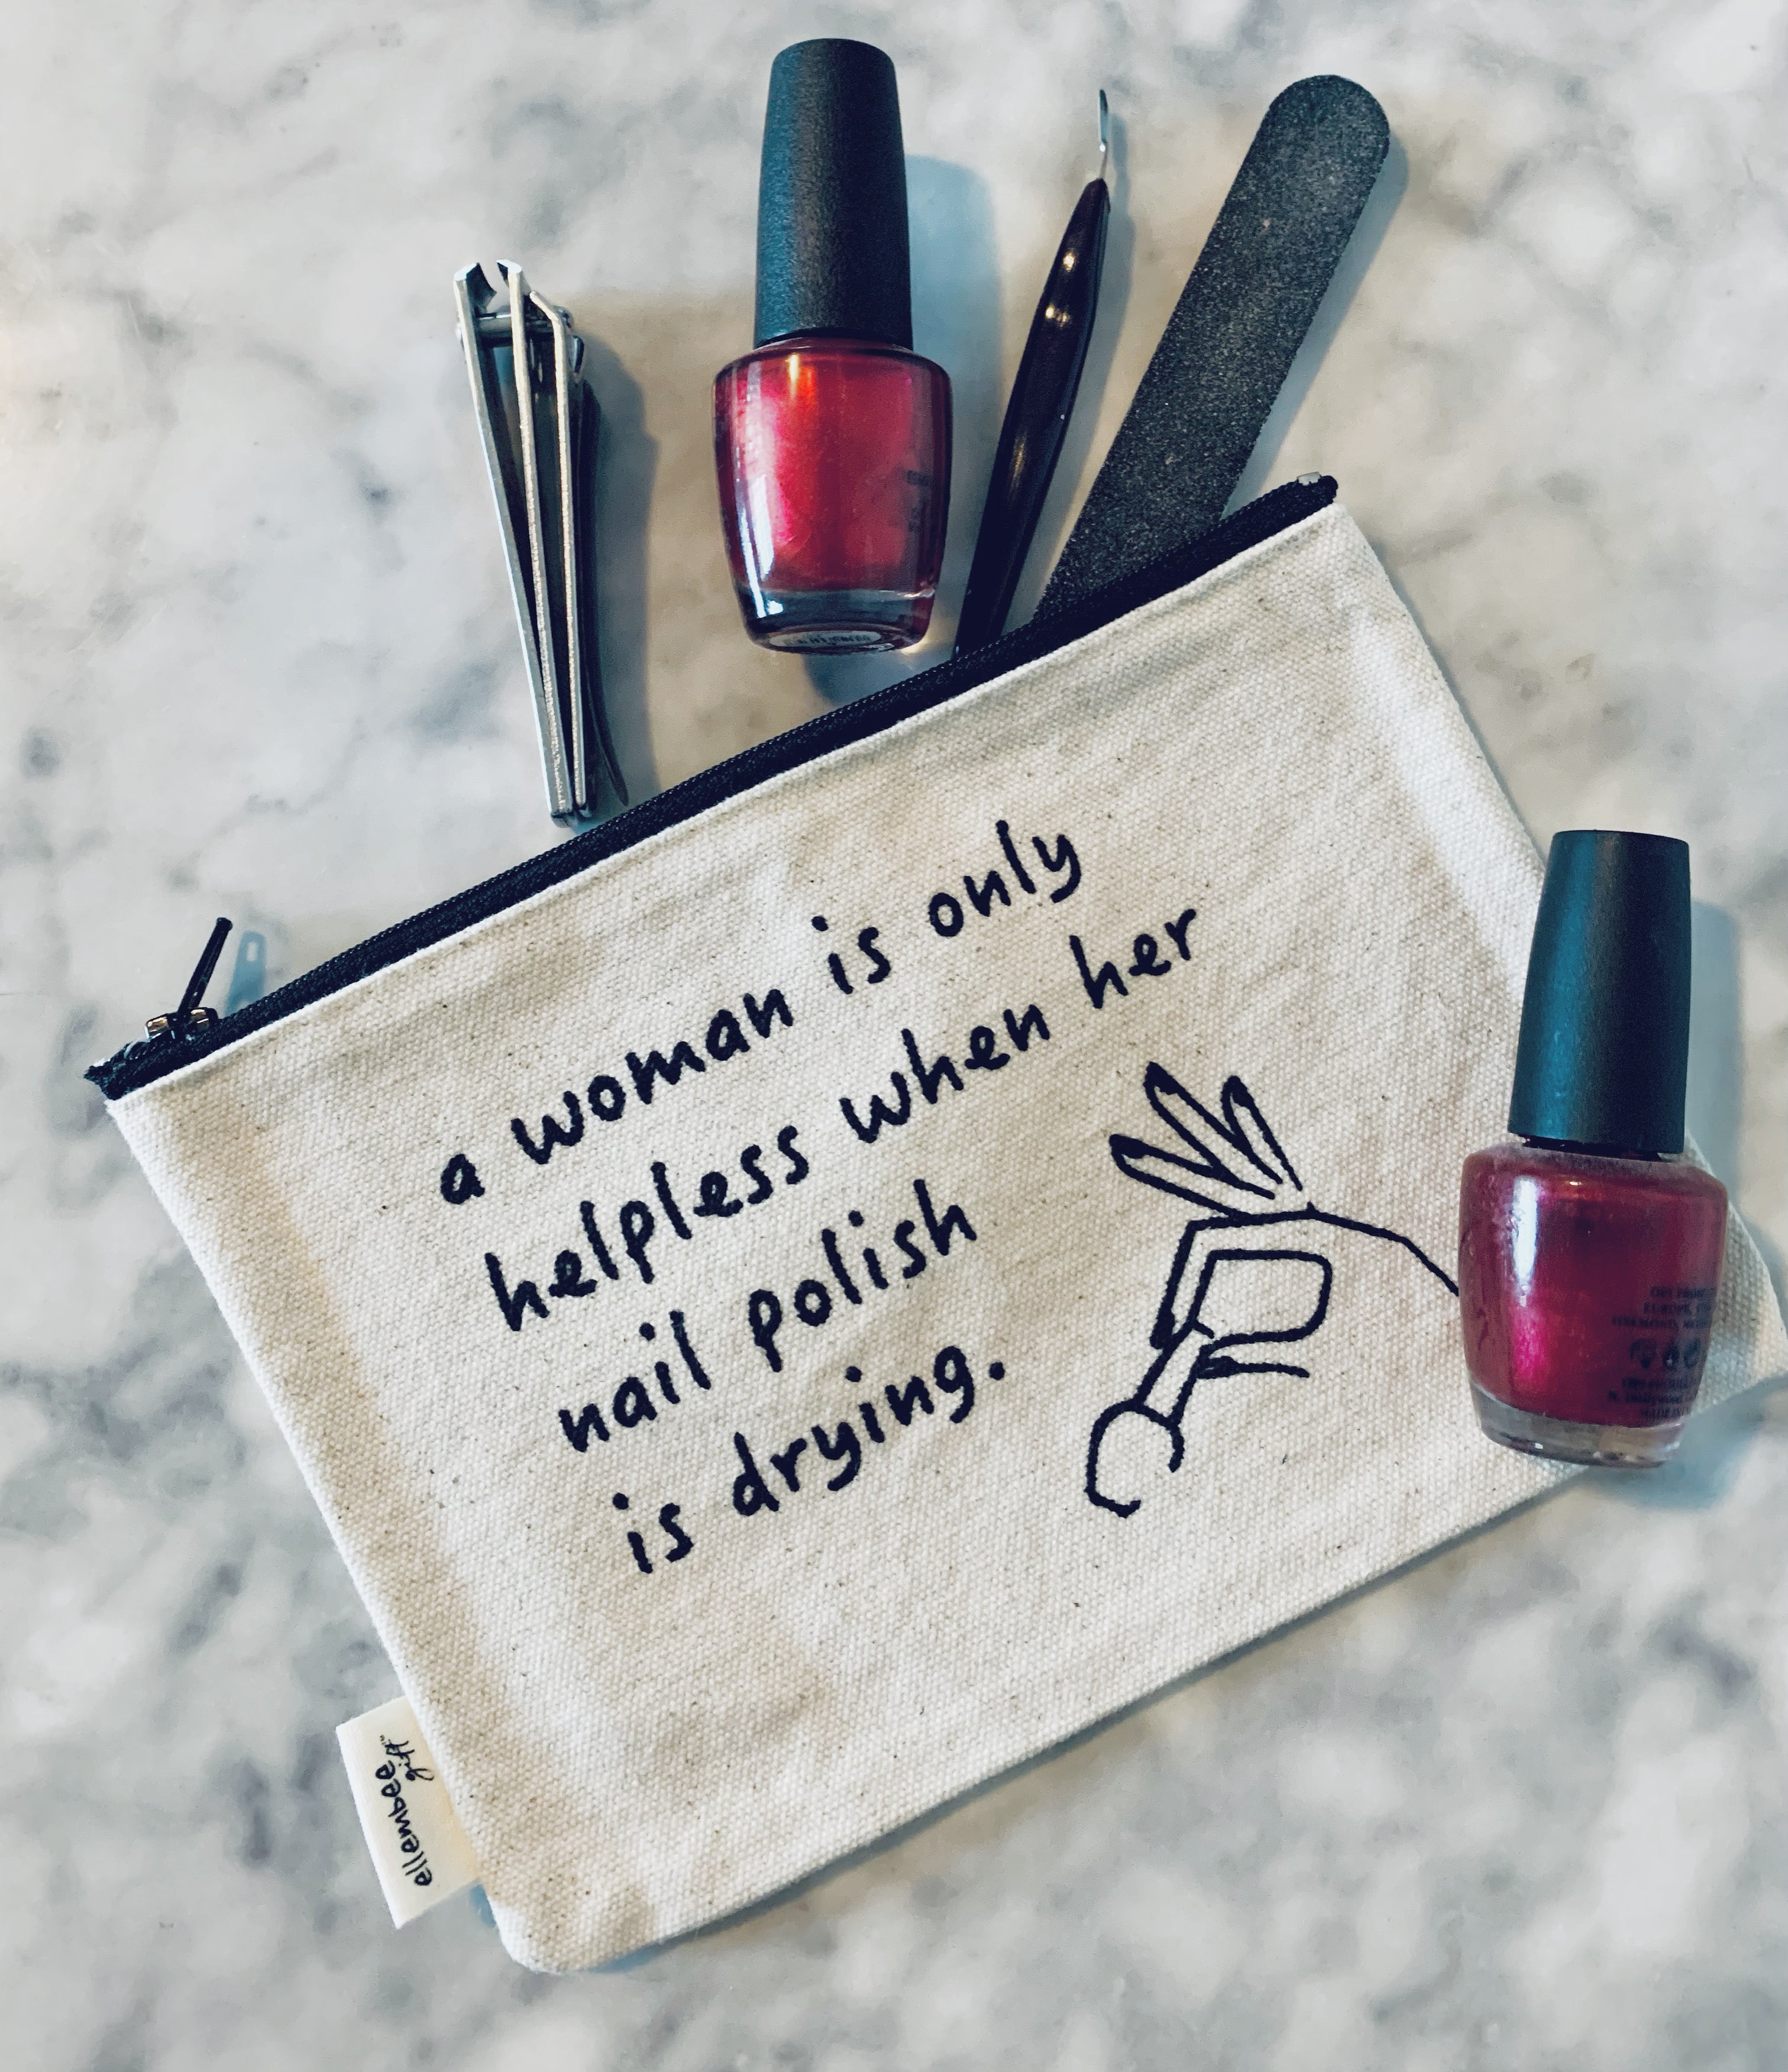 A woman is only helpless when her nail polish is drying zipper pouch